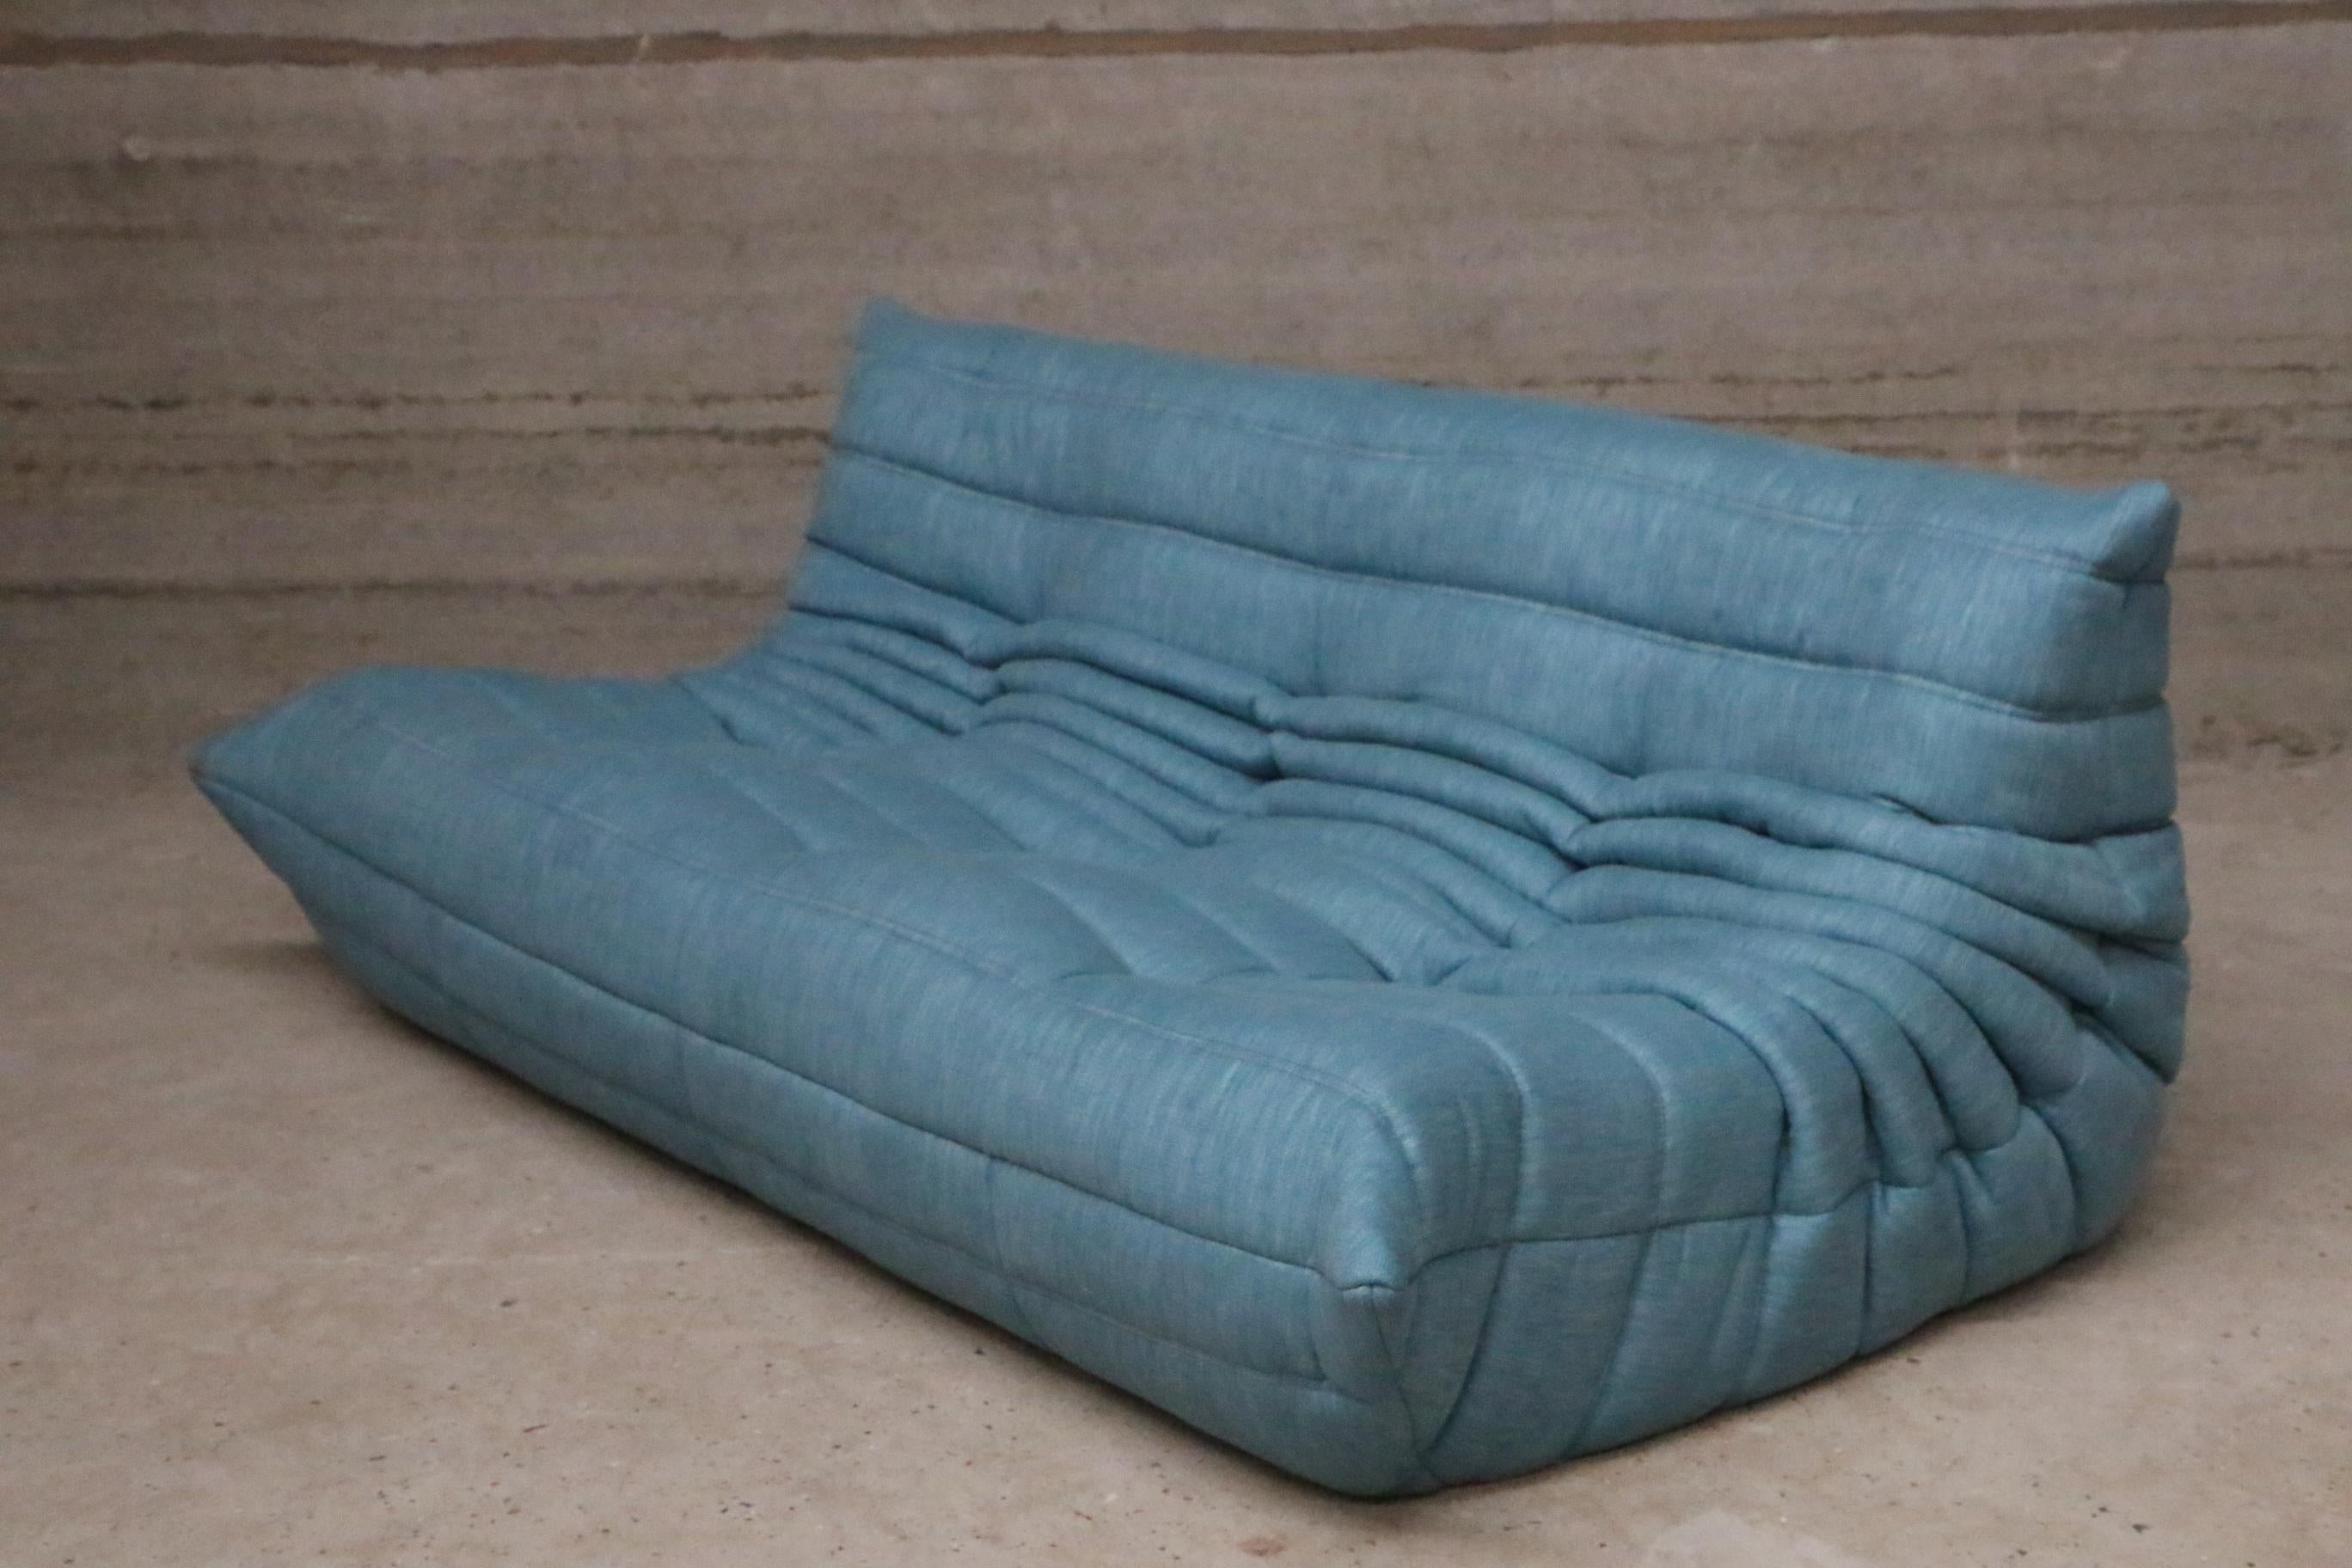 Iconic French vintage large settee, beautifully reupholstered in our brand new, stain free, washable and very durable 